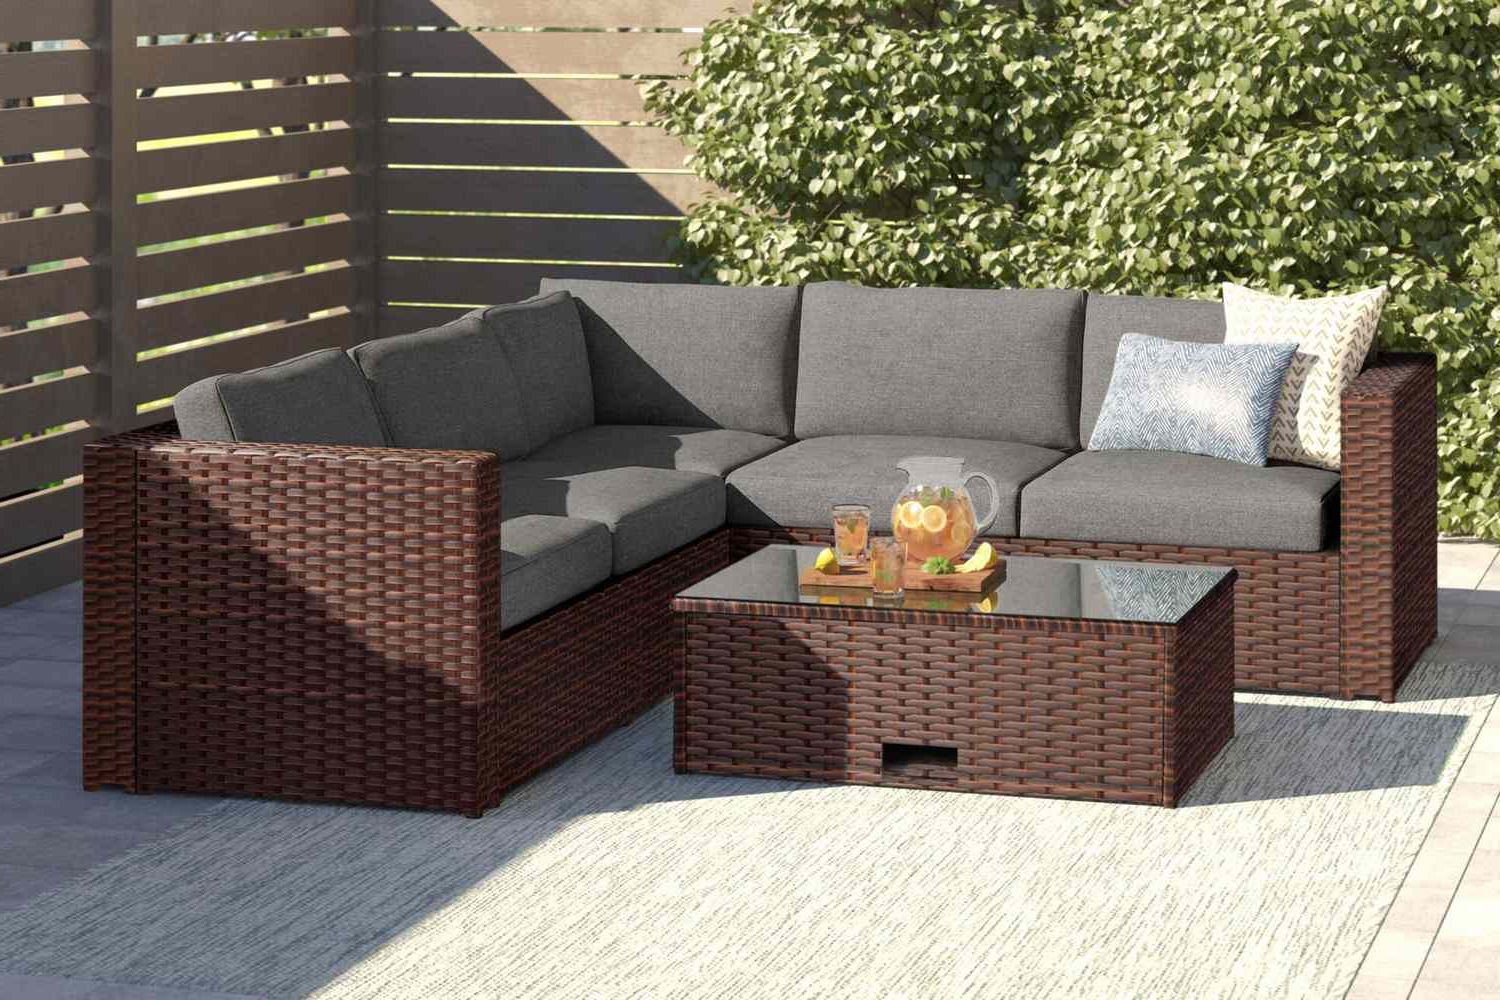 [%wayfair's Way Day Sale Has Patio Furniture For Up To 76% Off Regarding Preferred All Weather Wicker Sectional Seating Group|all Weather Wicker Sectional Seating Group Intended For Well Known Wayfair's Way Day Sale Has Patio Furniture For Up To 76% Off|latest All Weather Wicker Sectional Seating Group Regarding Wayfair's Way Day Sale Has Patio Furniture For Up To 76% Off|famous Wayfair's Way Day Sale Has Patio Furniture For Up To 76% Off With Regard To All Weather Wicker Sectional Seating Group%] (Photo 15 of 15)